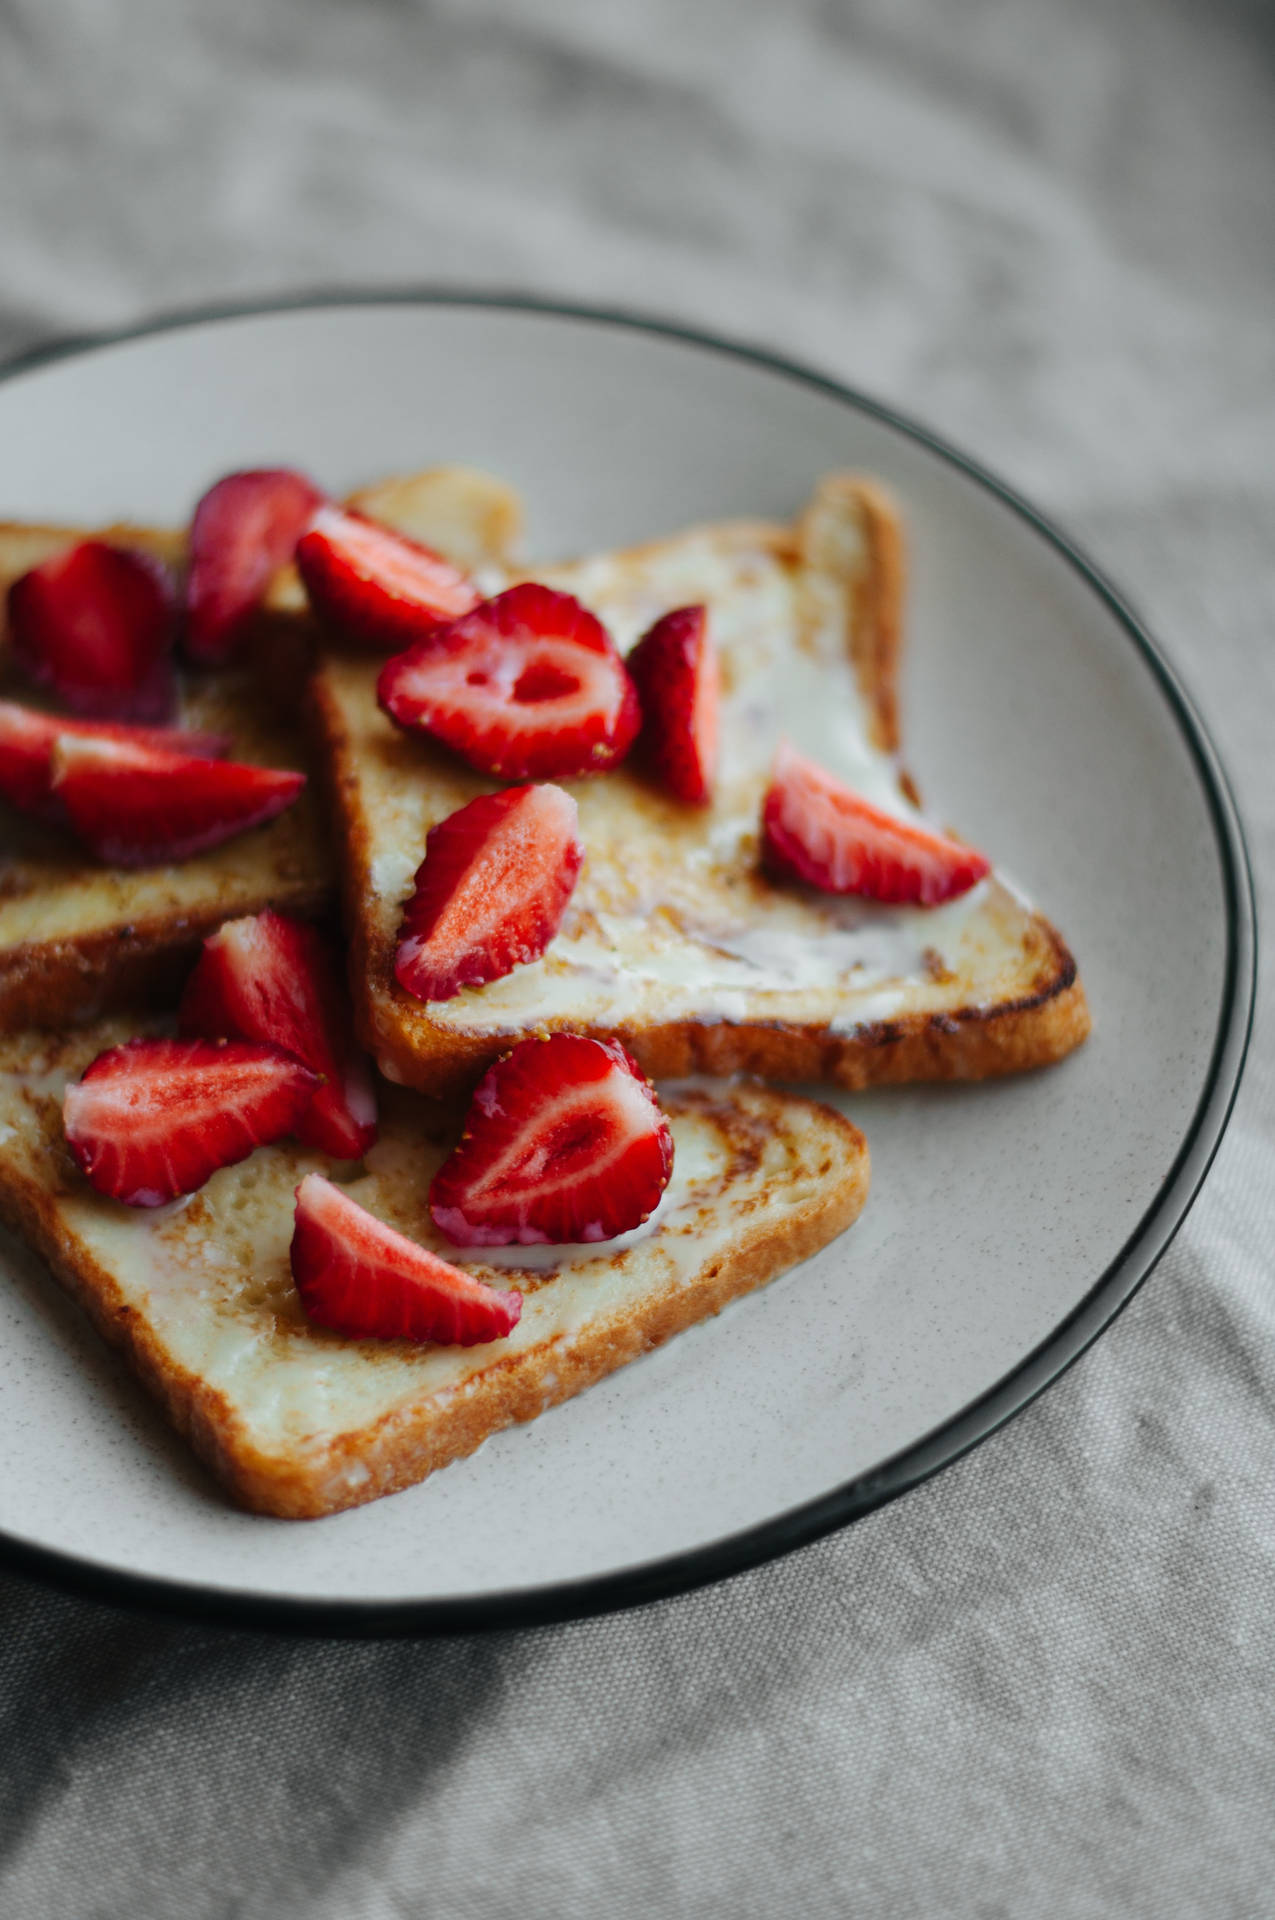 Delectable French Toast With Fresh Berries And Maple Syrup